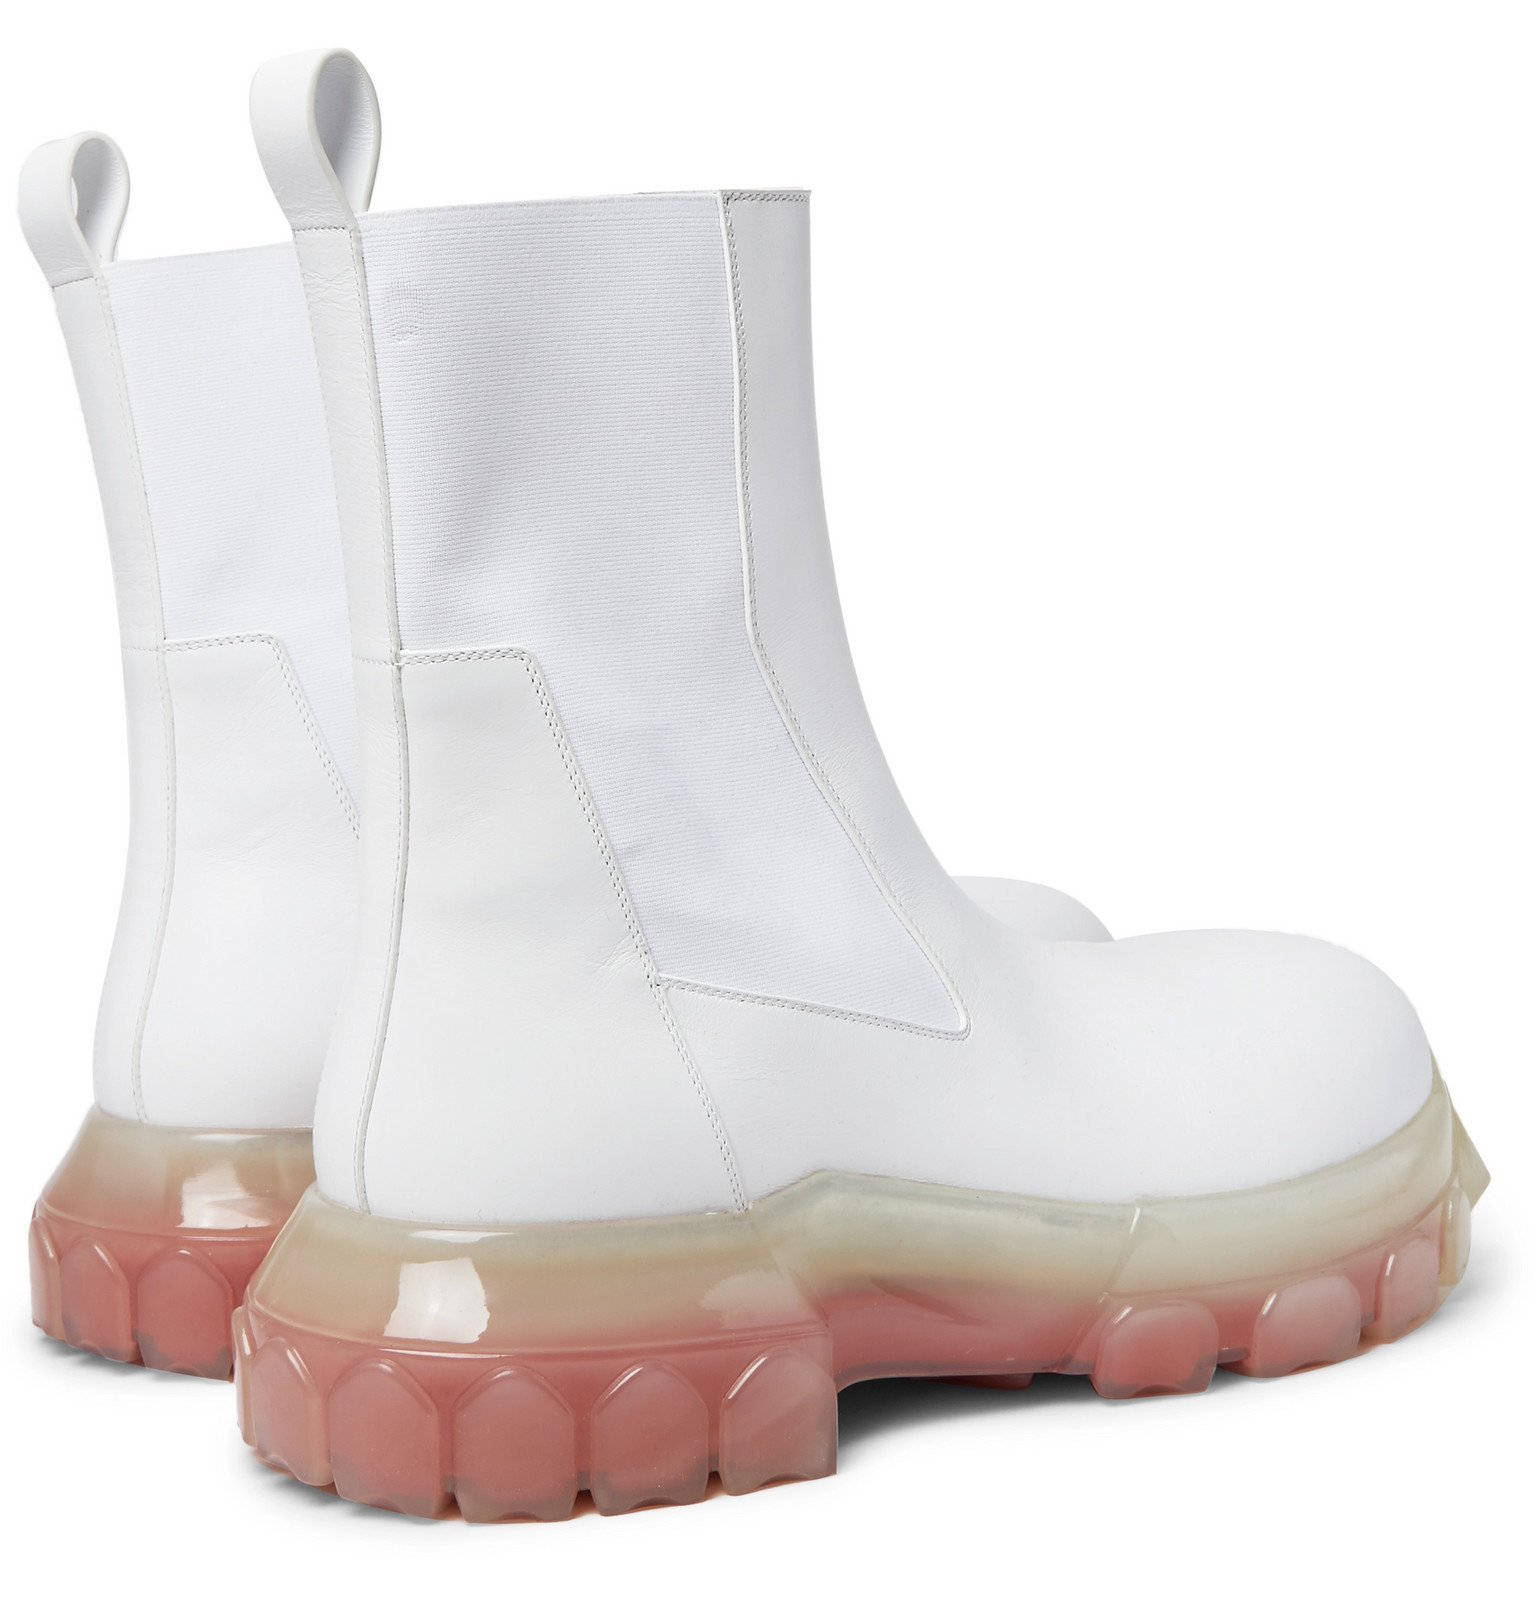 Rick Owens - Mega Bozo Tractor Beetle Leather Boots - White Rick Owens